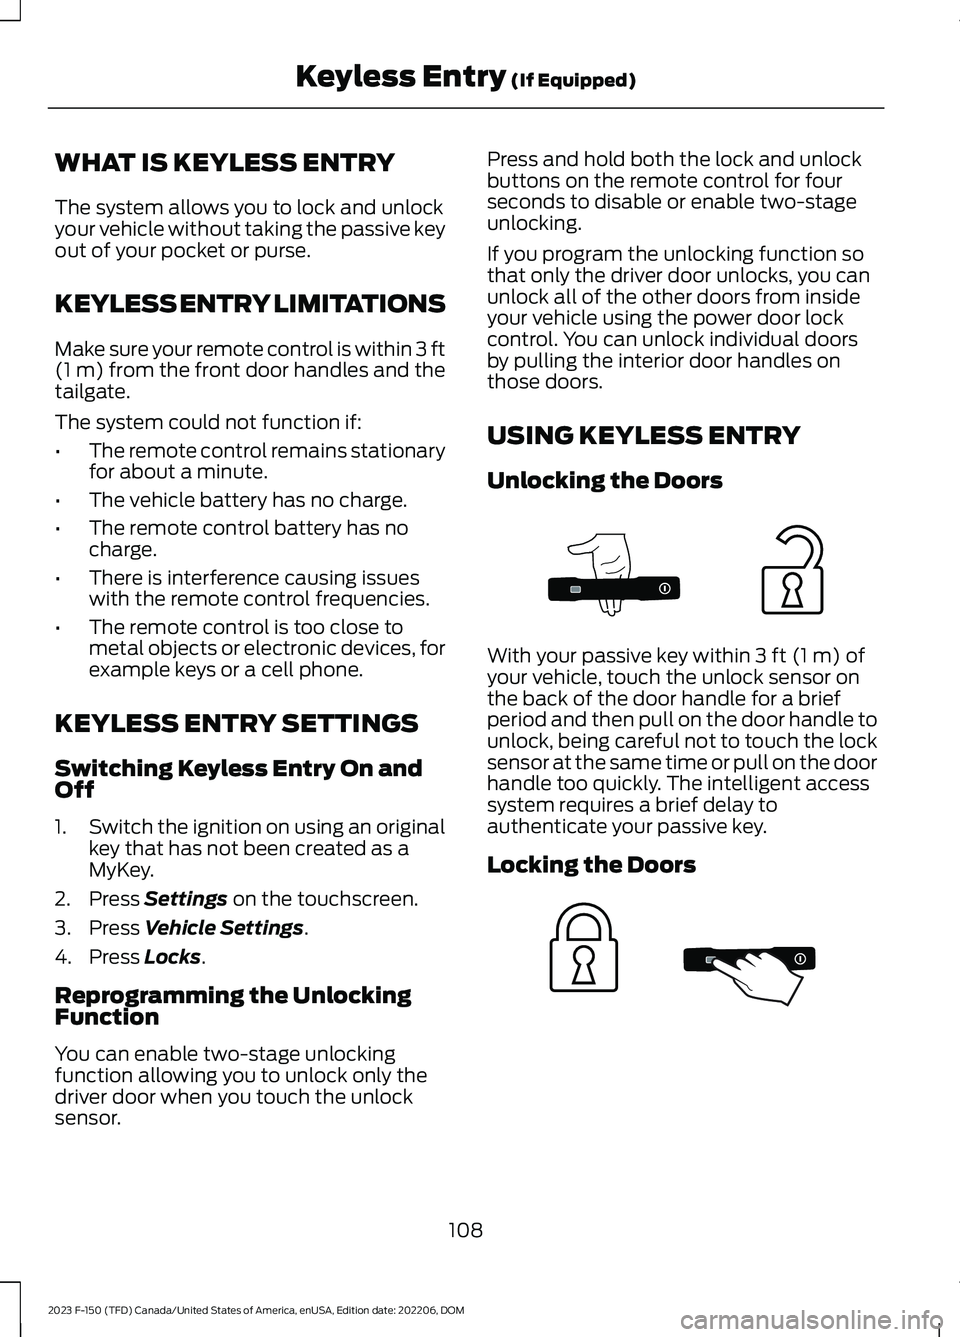 FORD F150 2023  Owners Manual WHAT IS KEYLESS ENTRY
The system allows you to lock and unlockyour vehicle without taking the passive keyout of your pocket or purse.
KEYLESS ENTRY LIMITATIONS
Make sure your remote control is within 